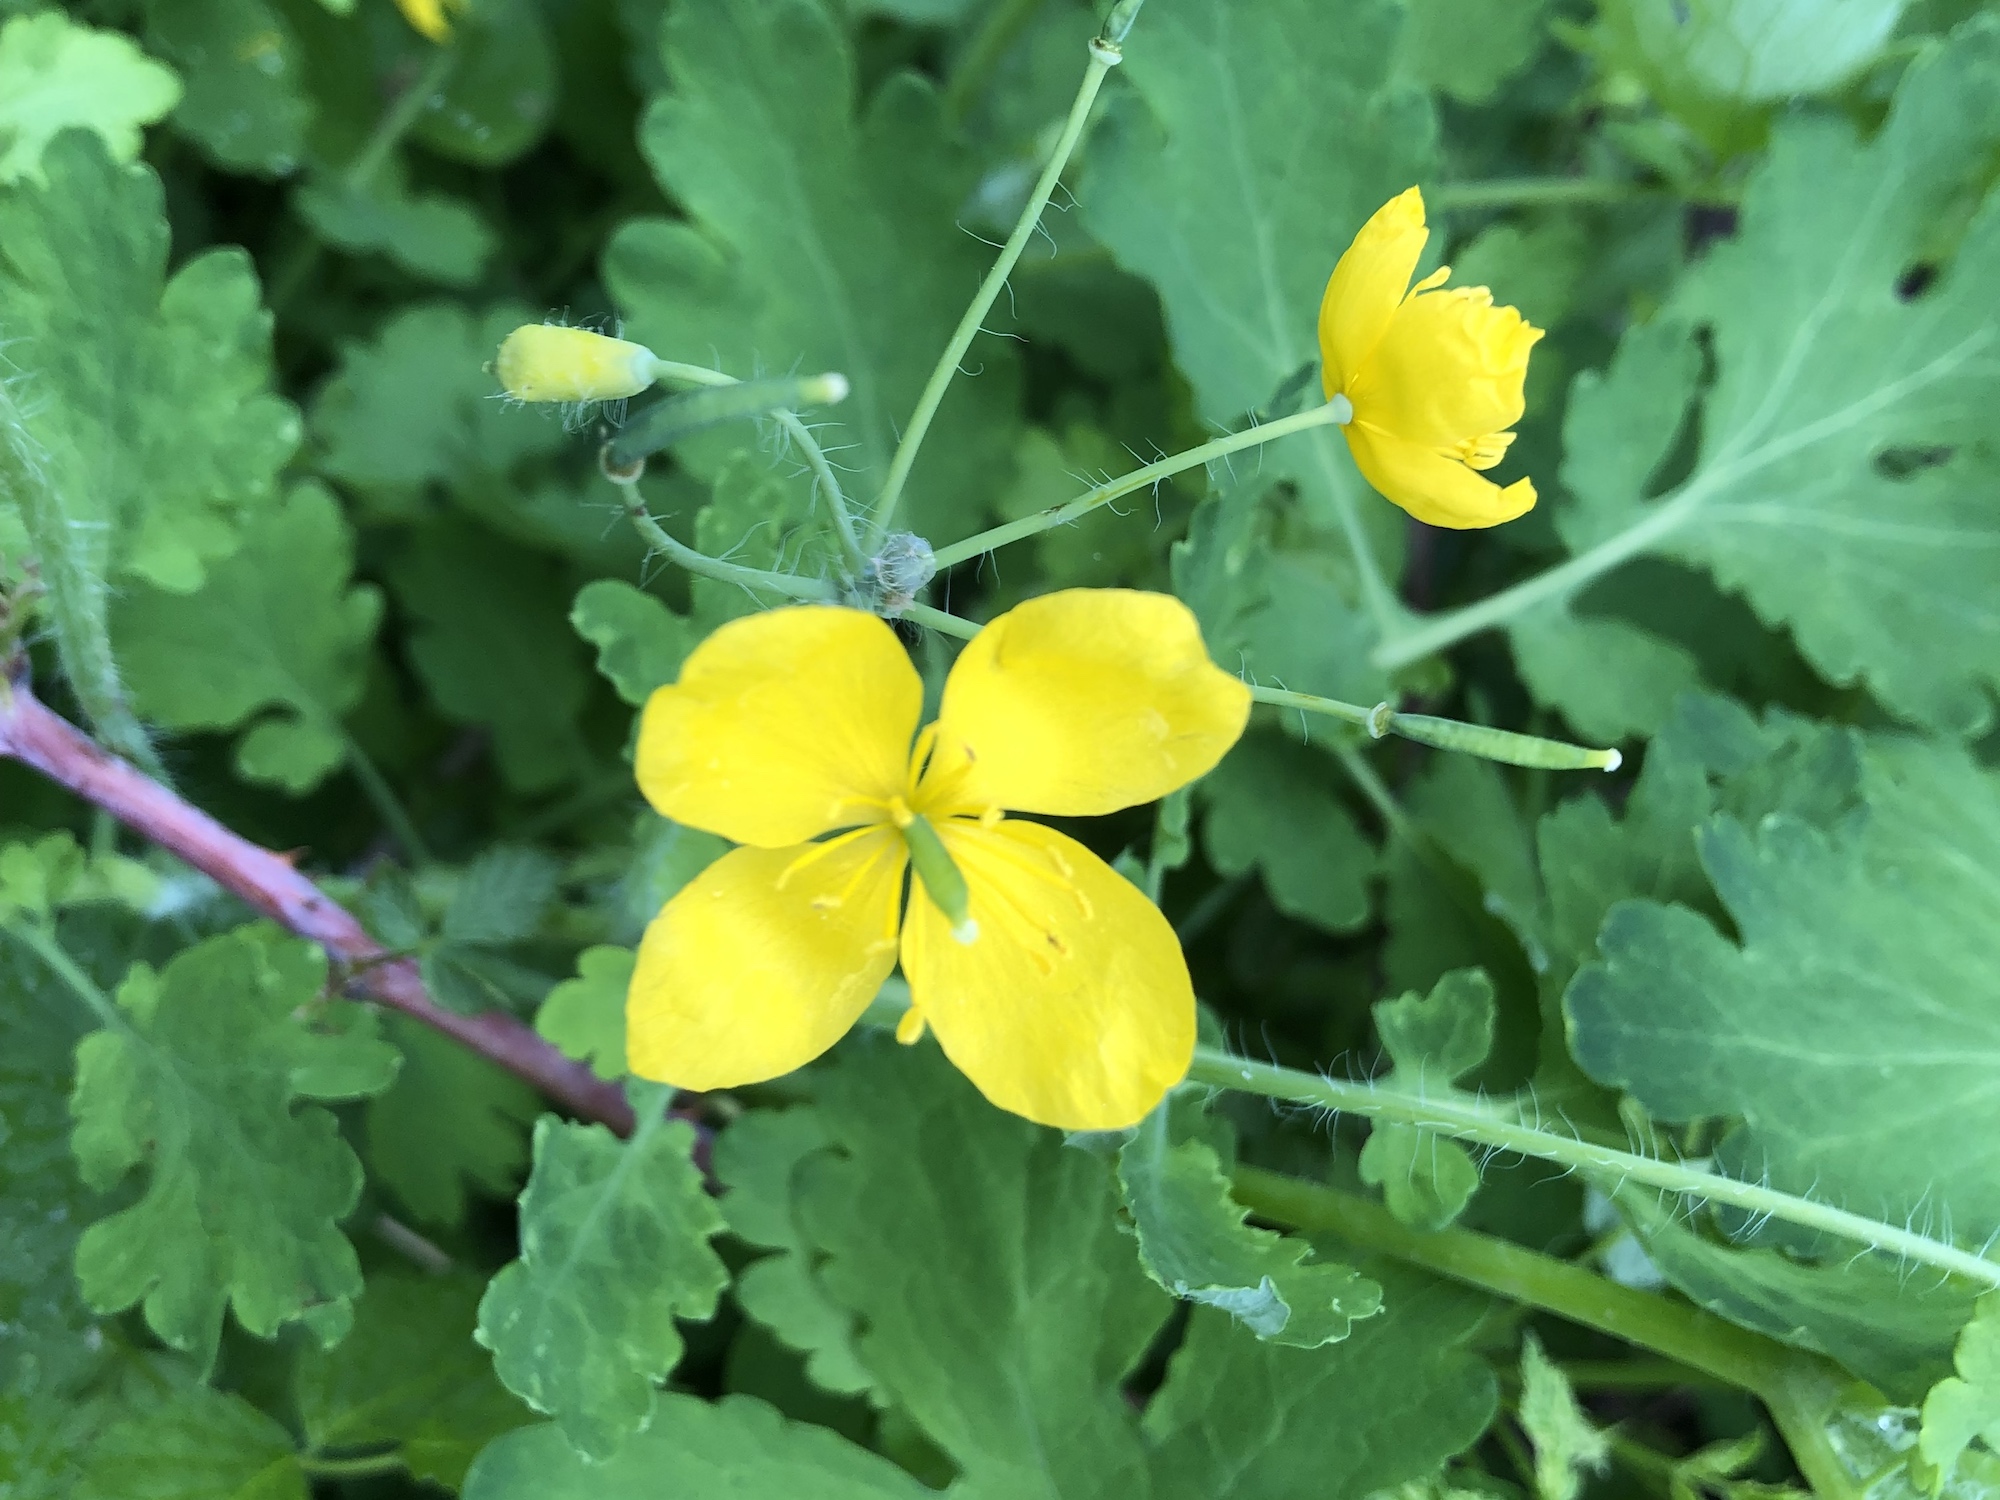 Greater Celandine on May 20, 2019.